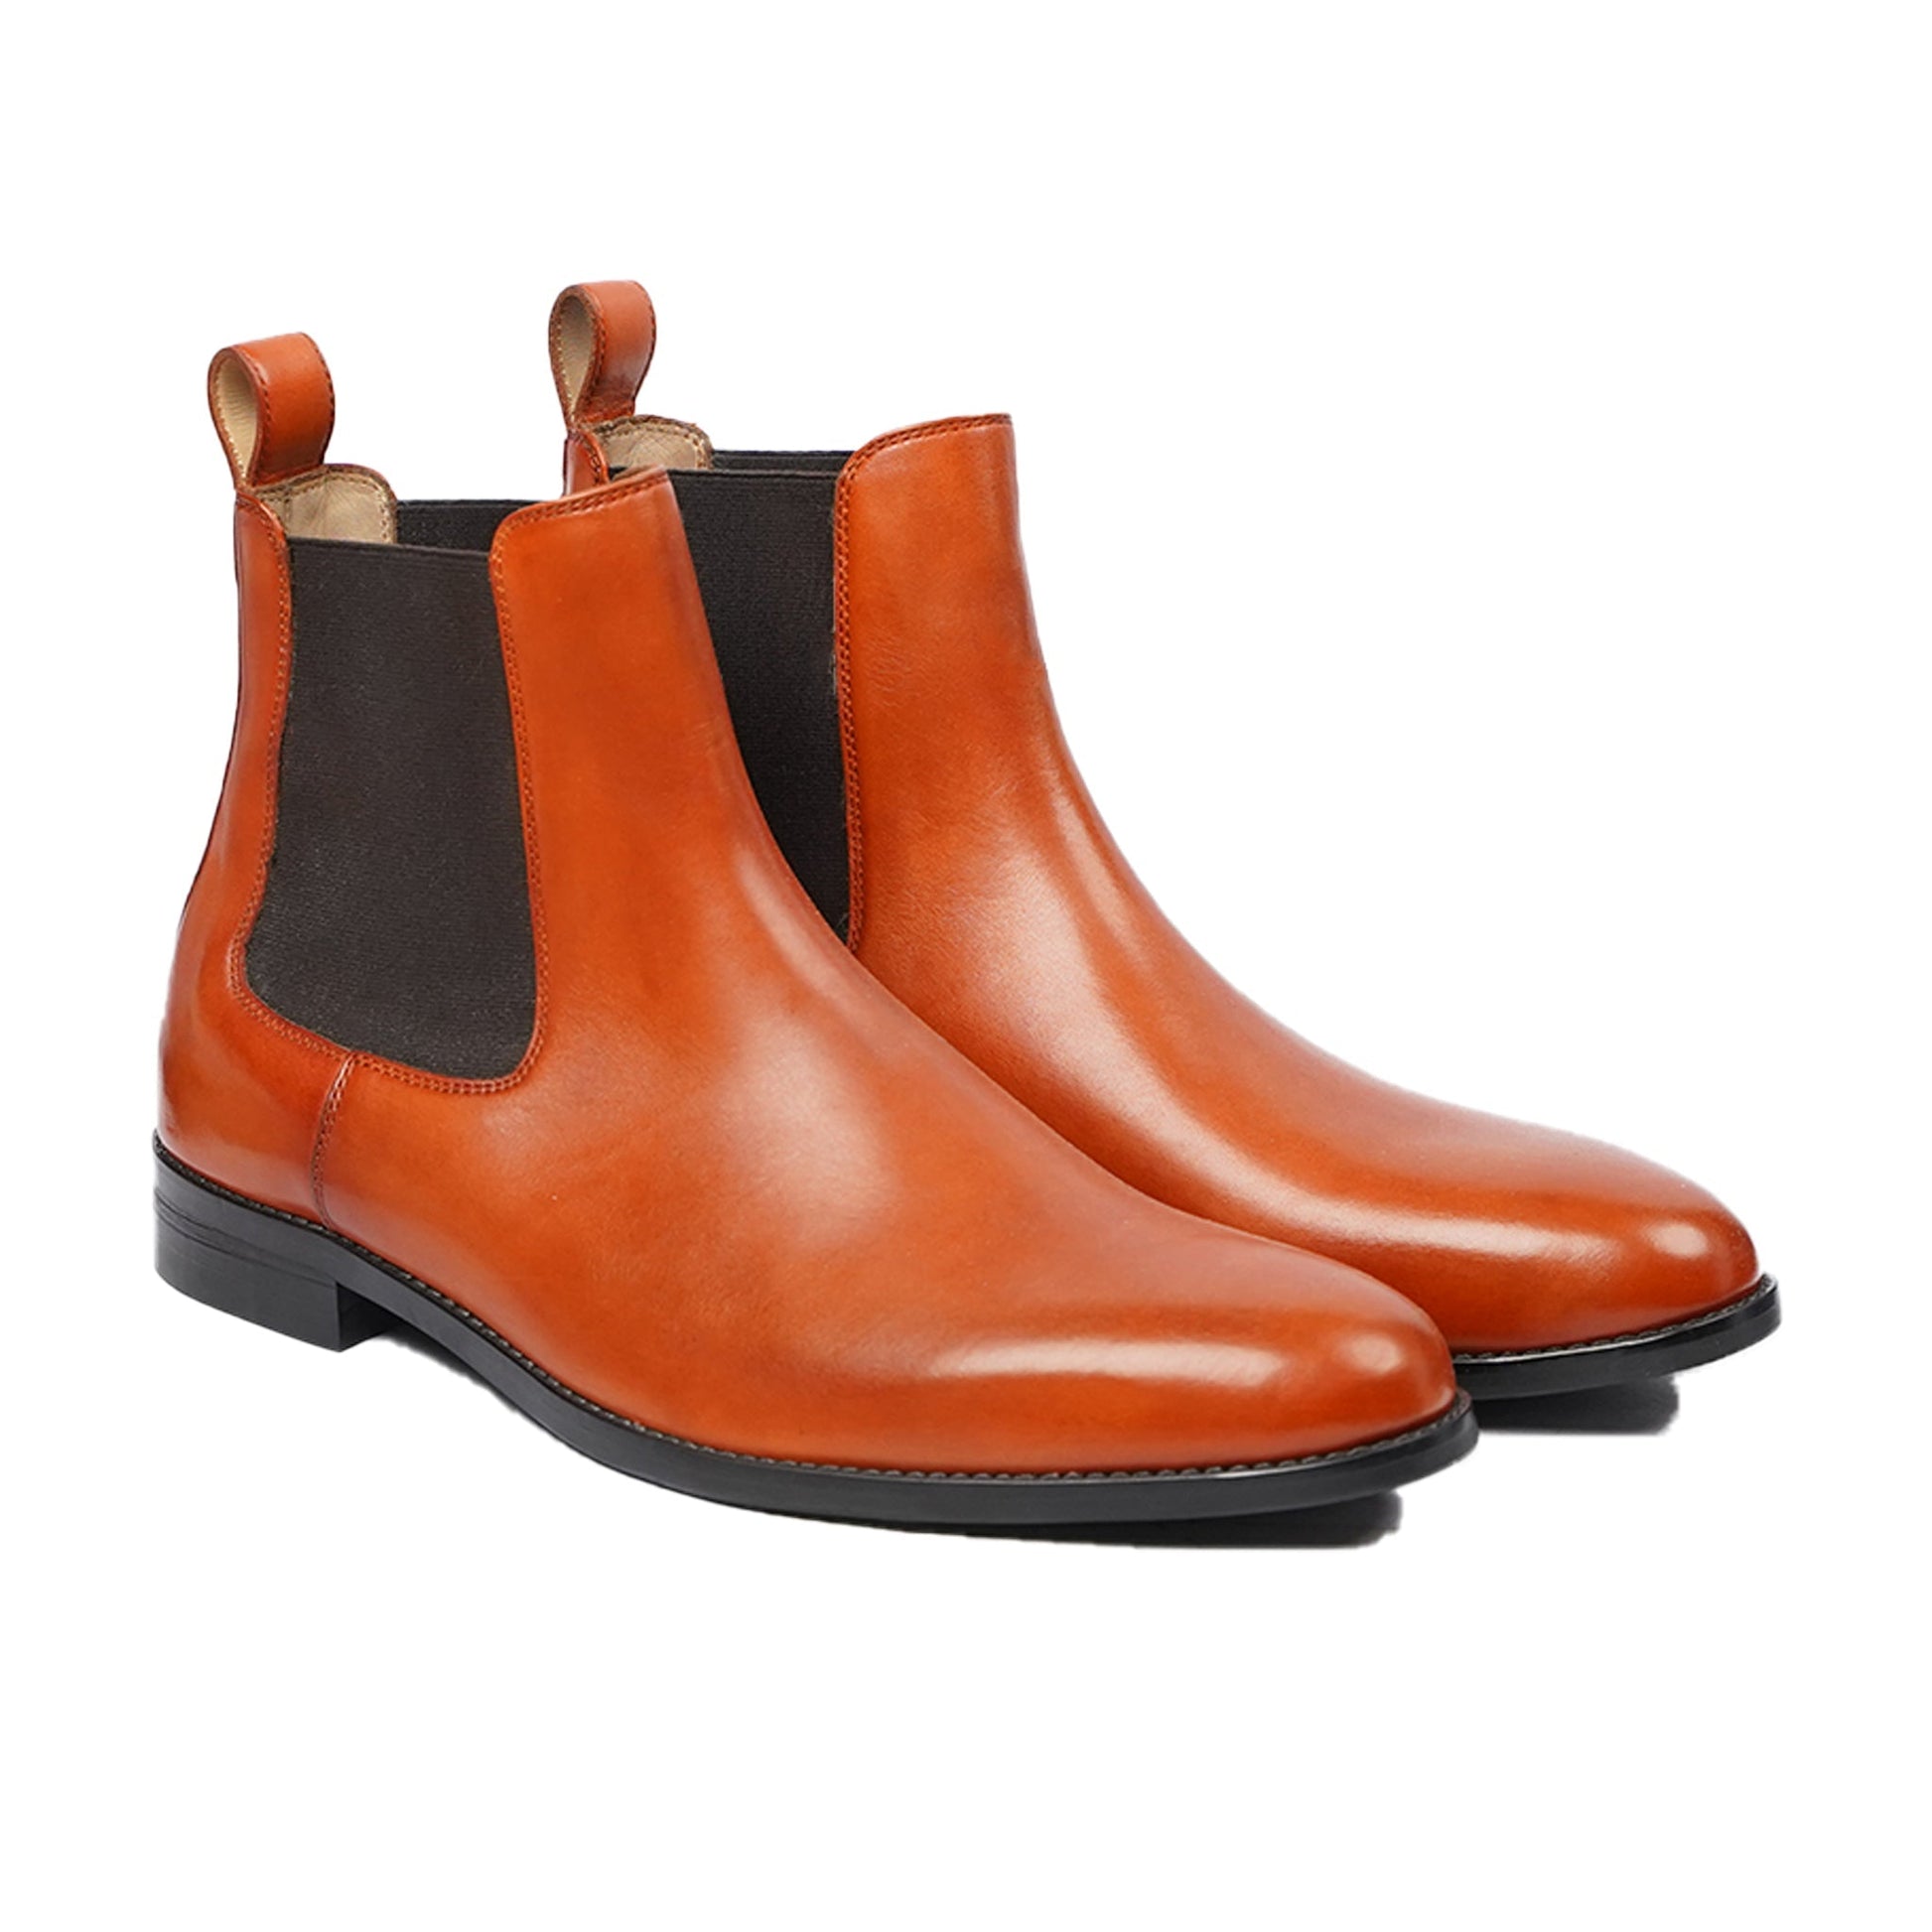 North Dakota Chelsea Boot A2 Leather Boots